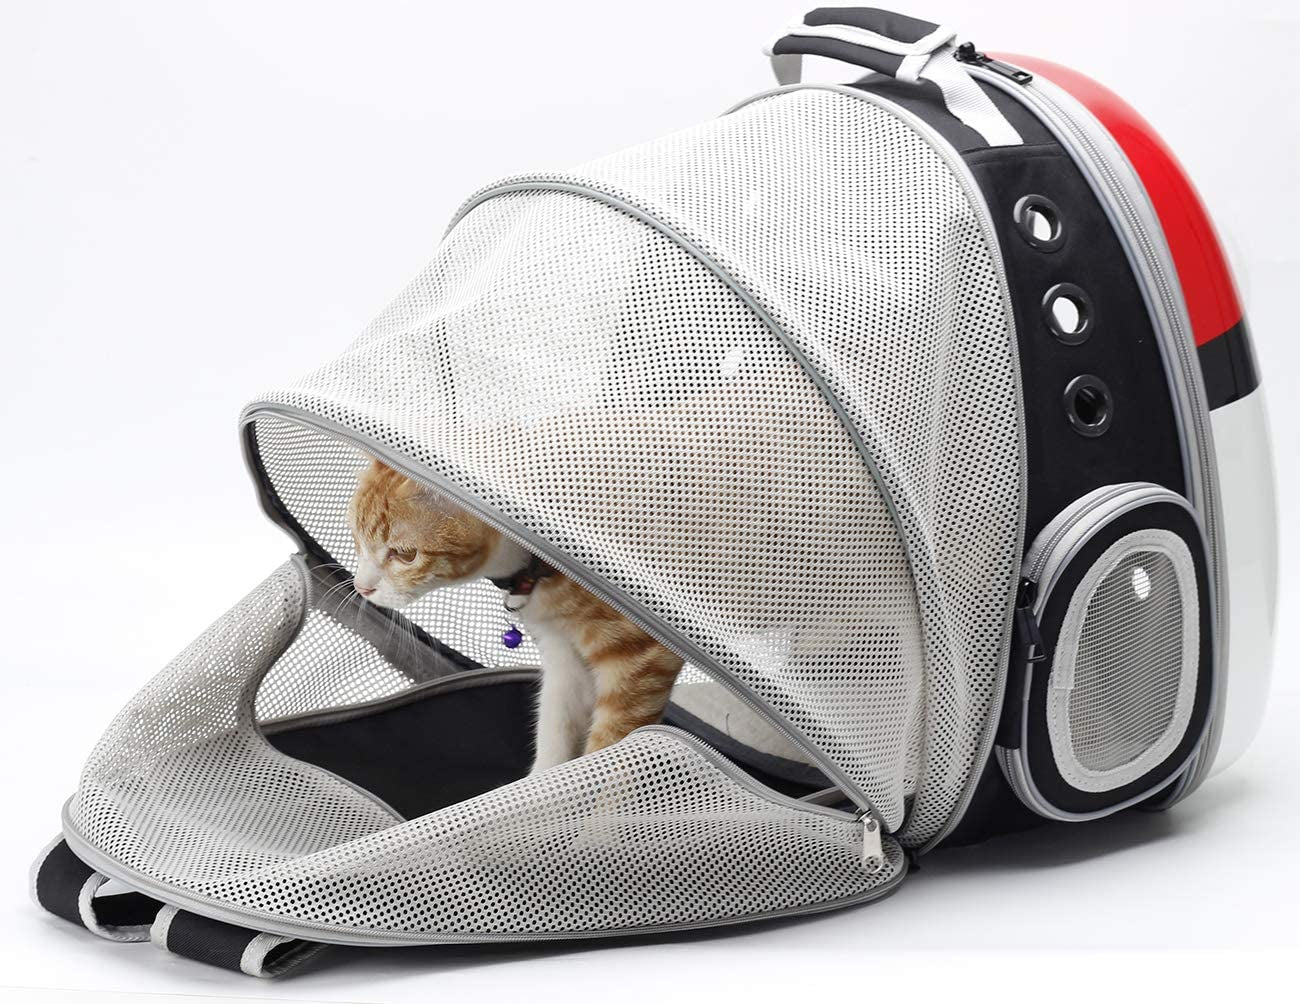 Expandable Cat Carrier Backpack Bubble, Space Capsule Bubble Pet Travel Carrier for Small Dog, Pet Hiking Traveling Backpack (Pokemon, Expandable Backpack - Solid Hard)